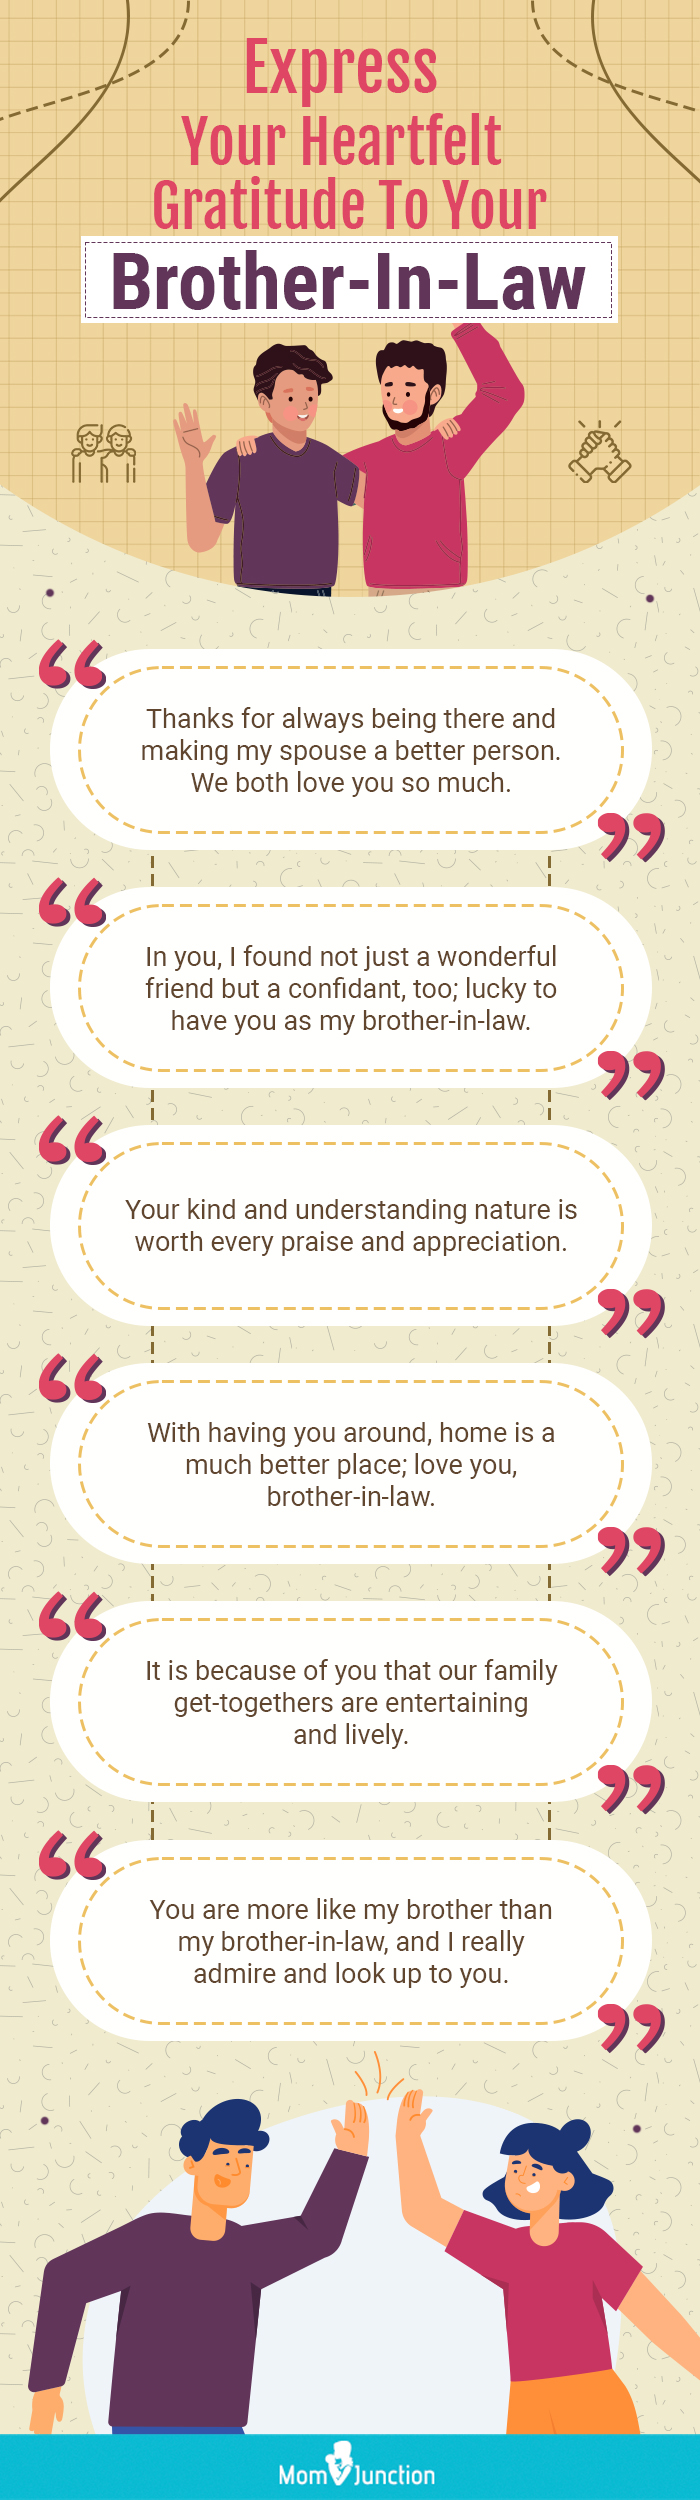 75 Thoughtful Brother-In-Law Quotes To Express Gratitude